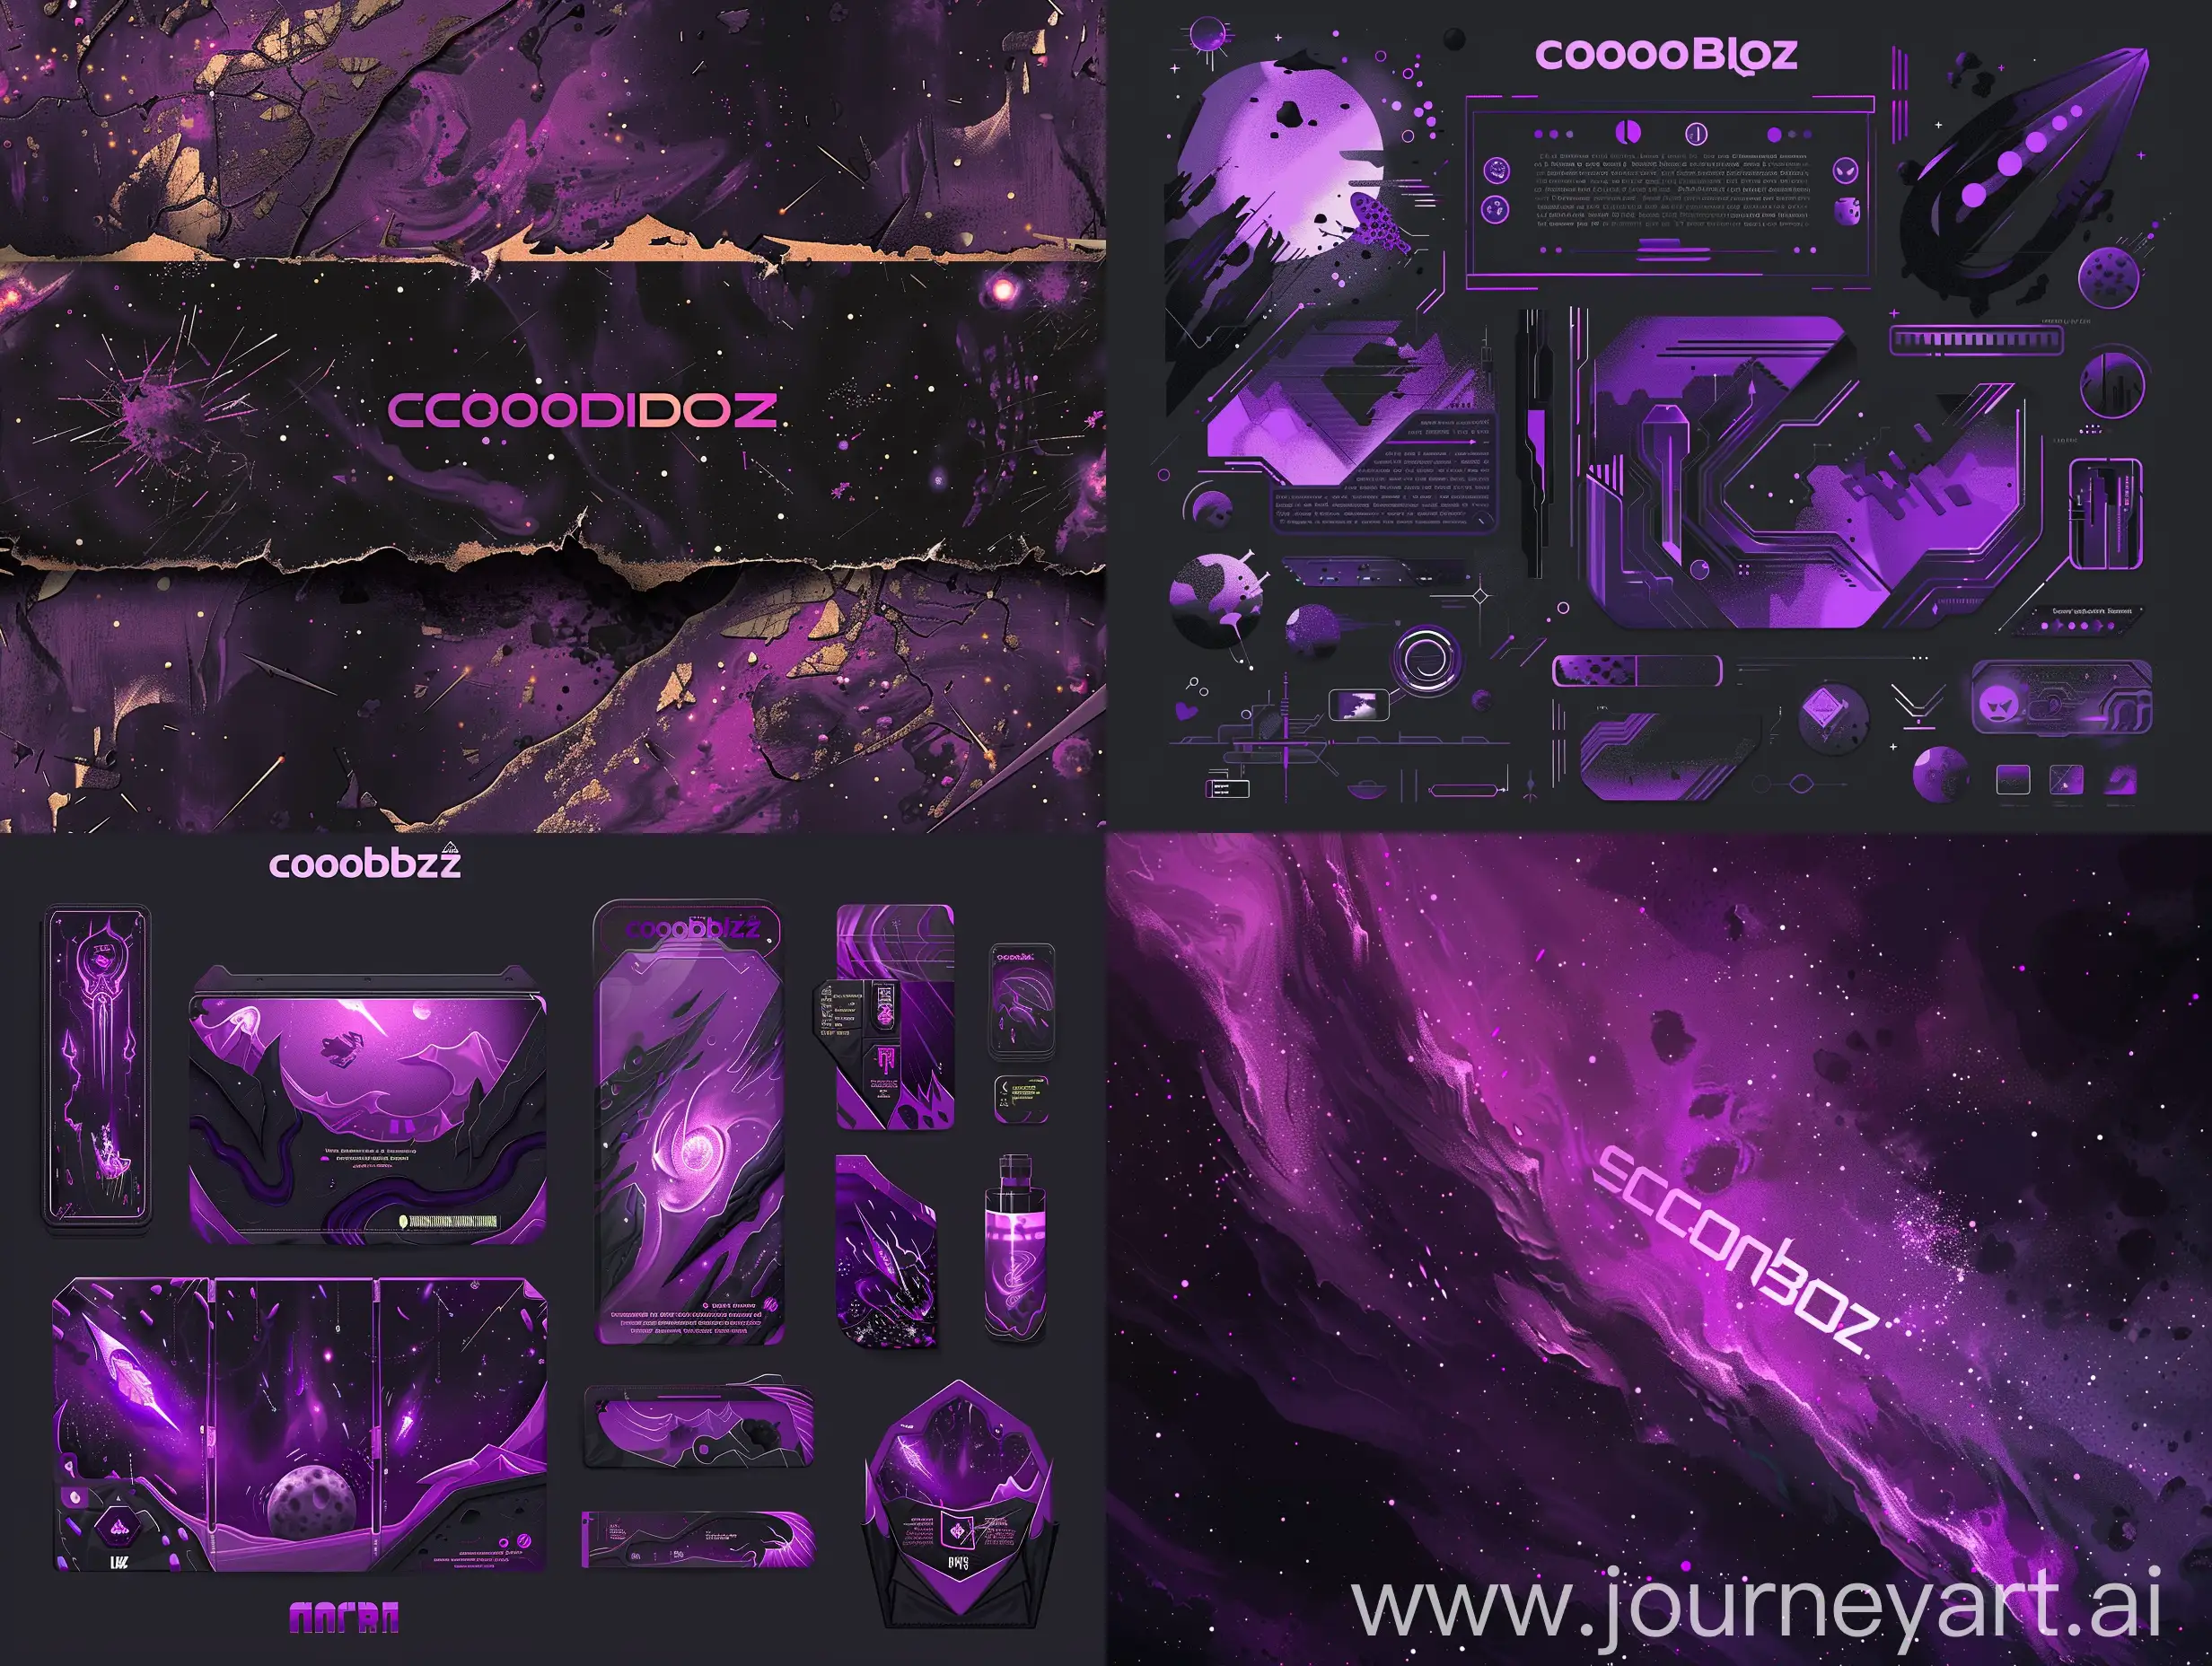 Epic-Cosmic-Invasion-CosmoBioz-Game-Graphics-in-Purple-and-Black-Shades